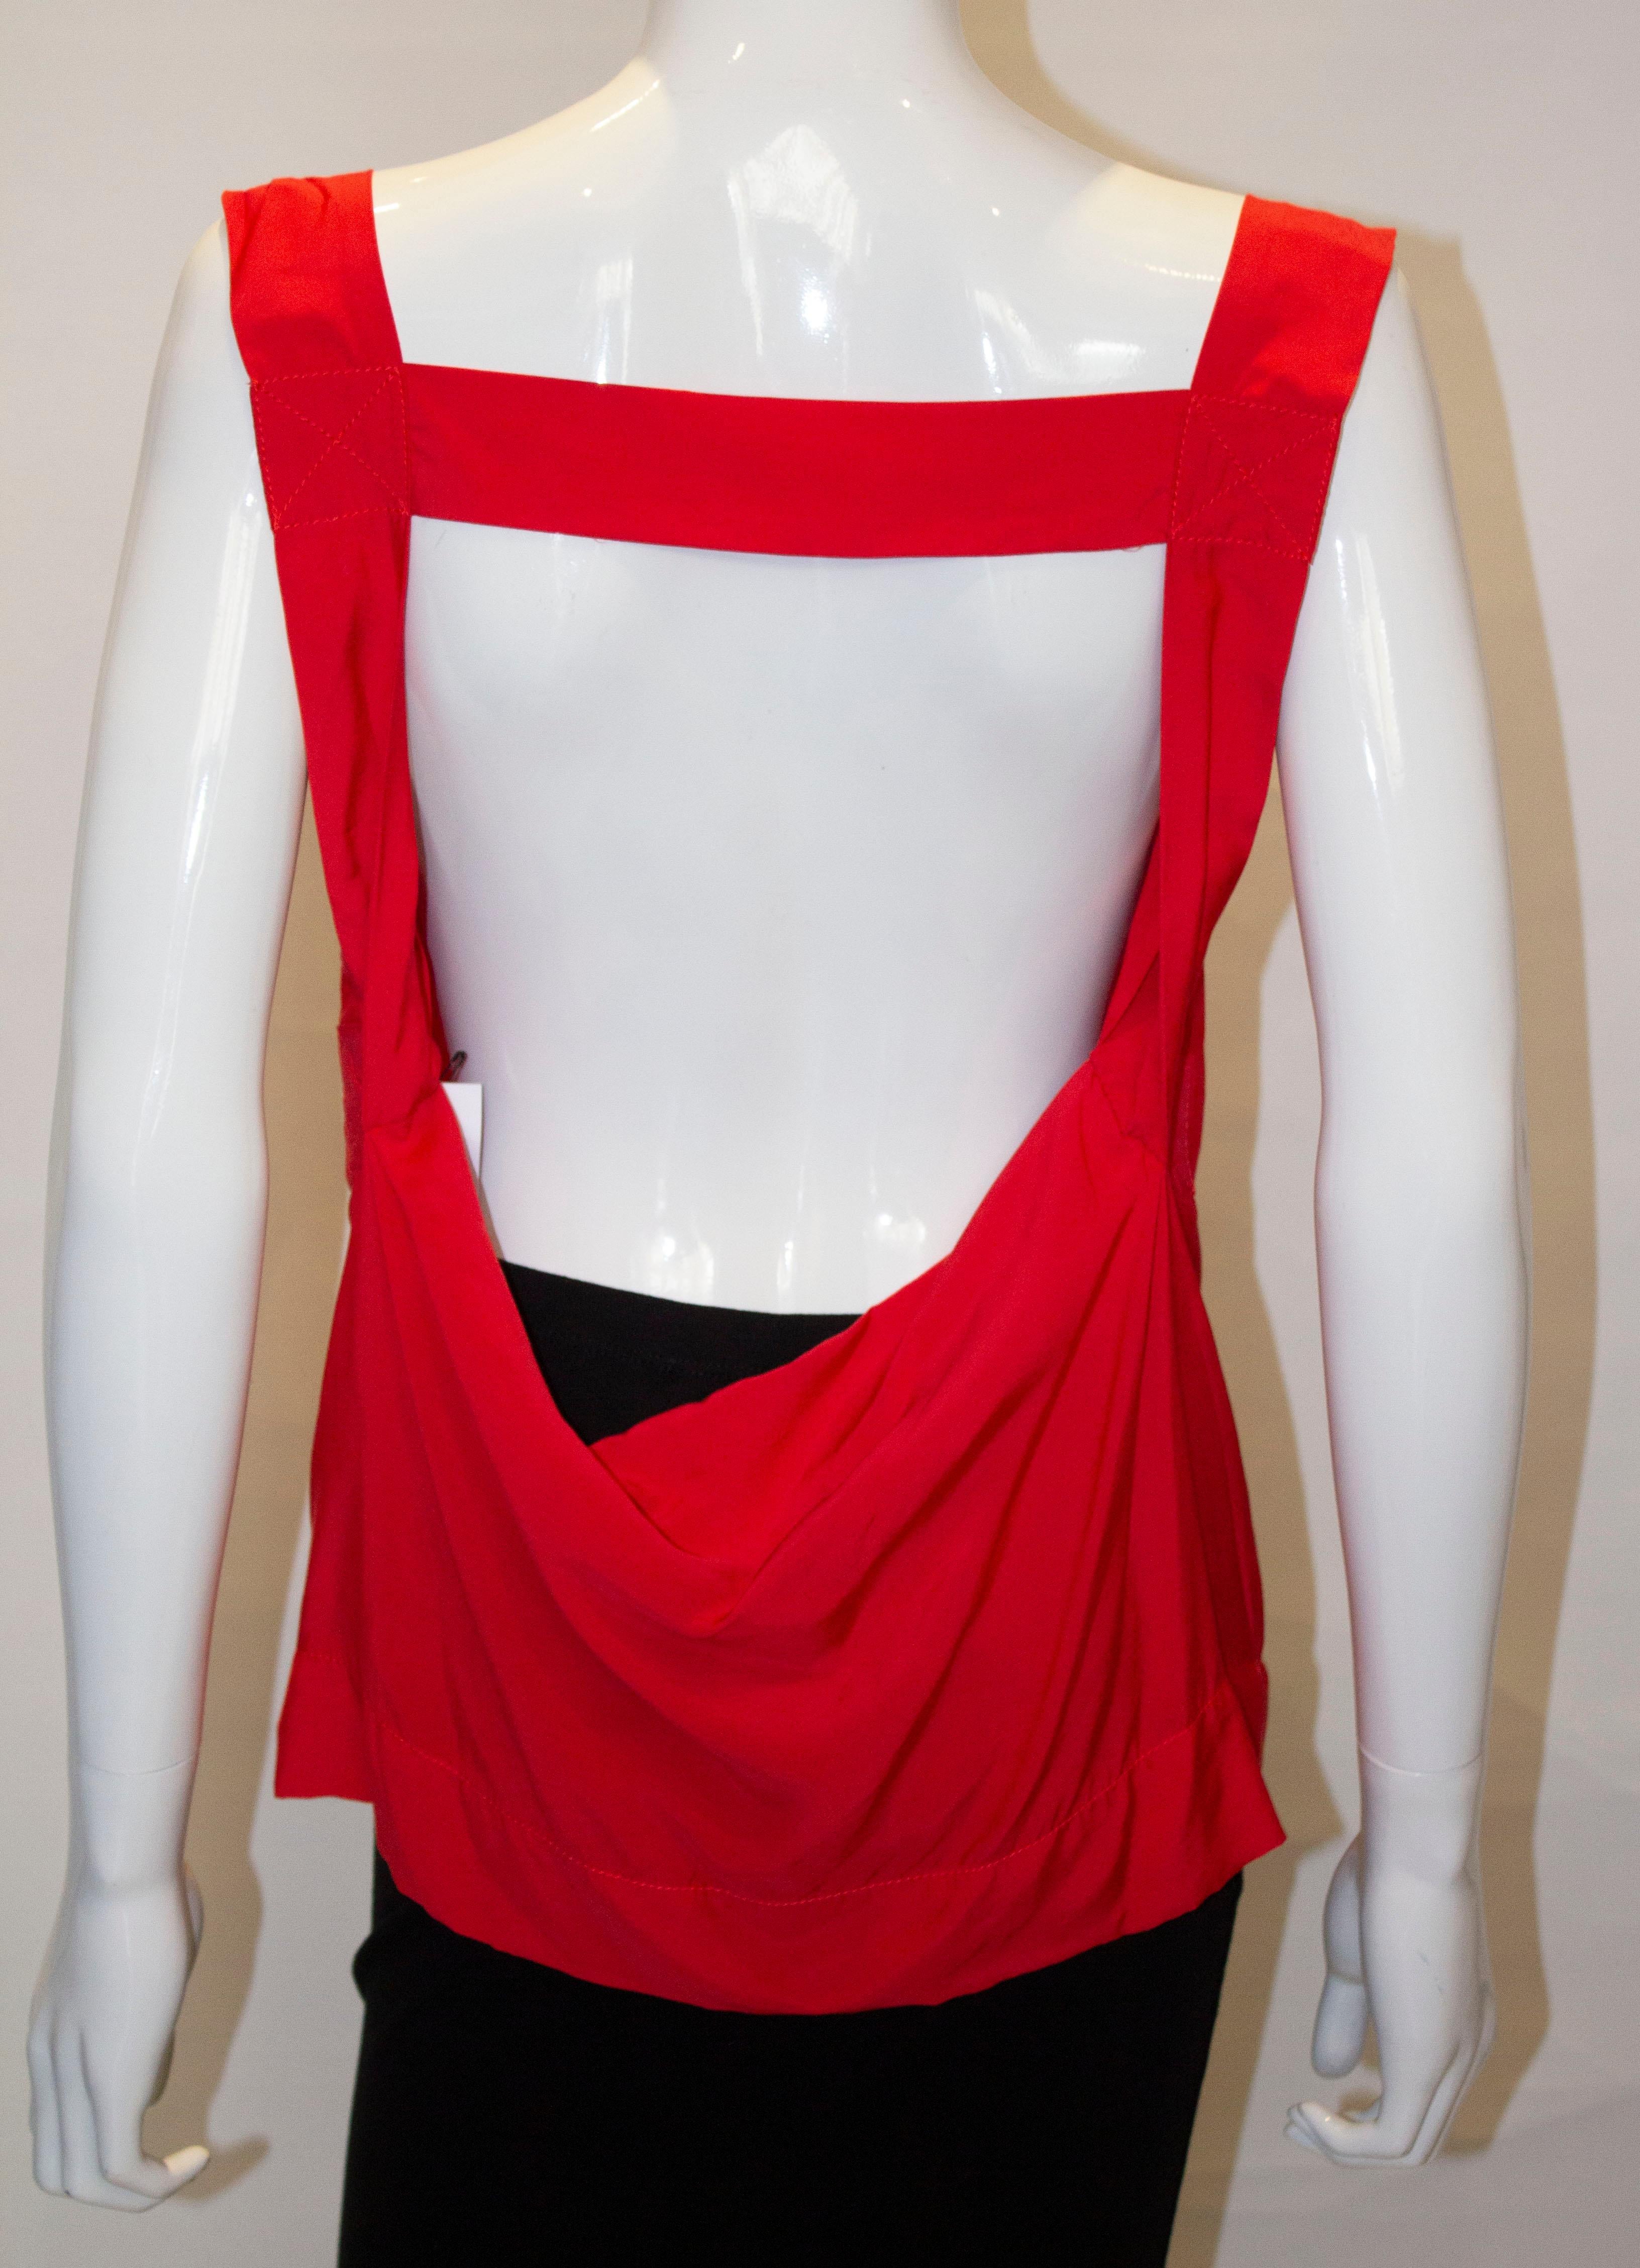 Women's Vivienne Westwood Anglomania Red Top